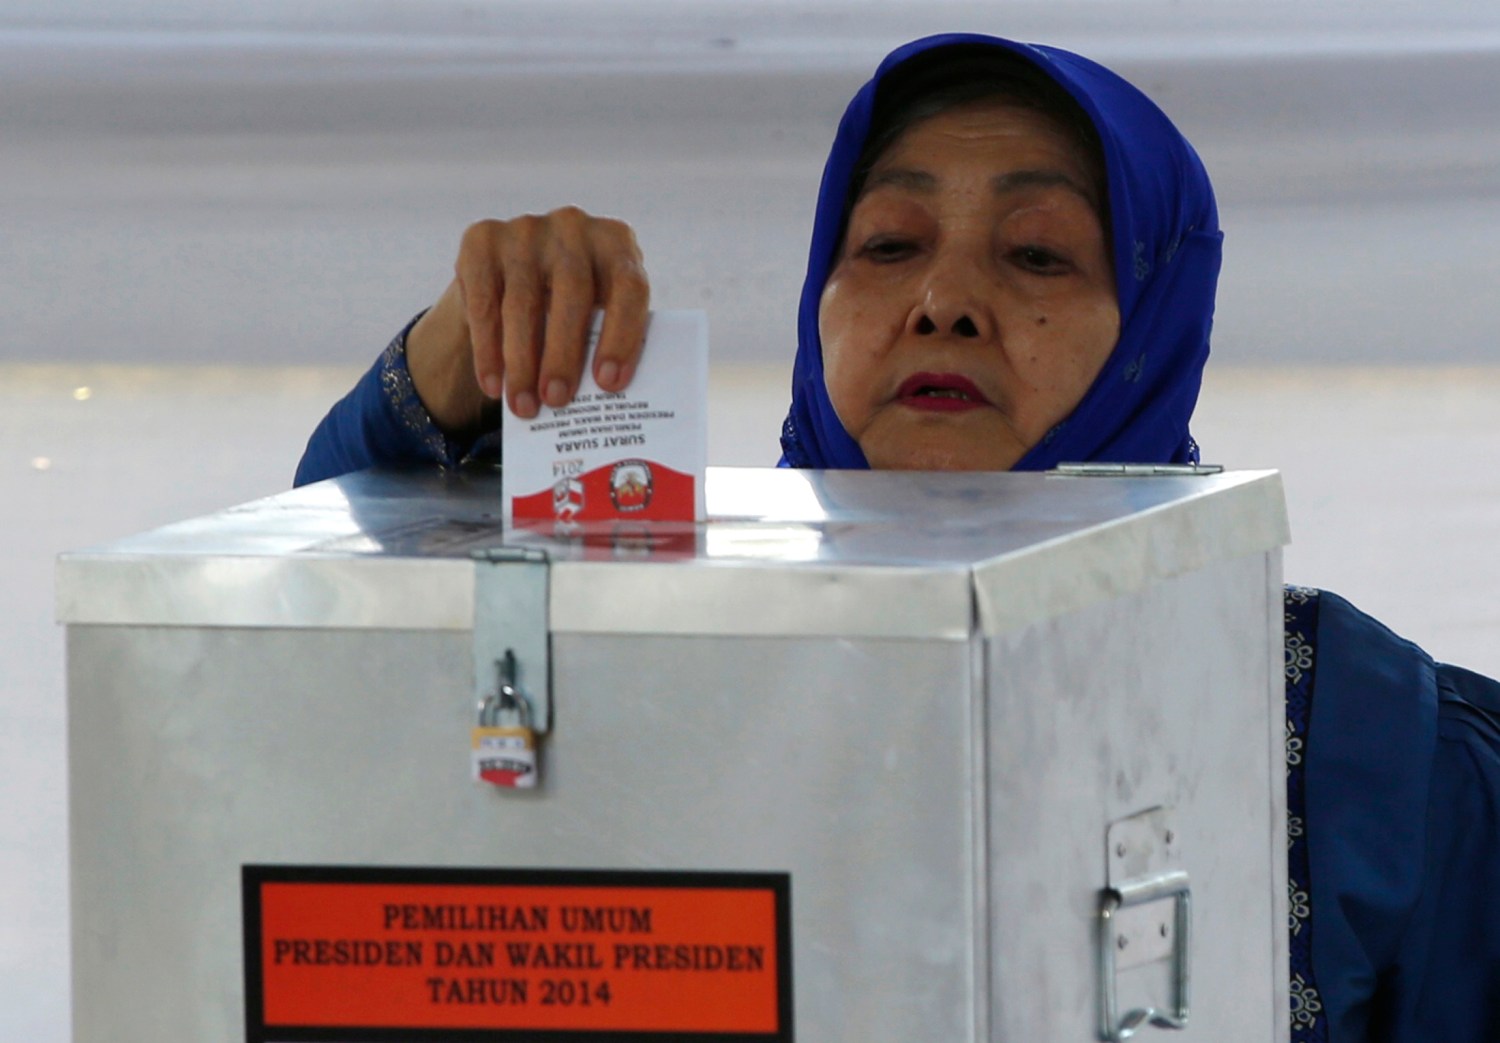 A voter casts her ballot at a polling station, where Indonesian presidential candidate Joko "Jokowi" Widodo and his wife Iriana, will cast their vote later in Jakarta July 9, 2014. Indonesians voted in a presidential election on Wednesday that has become a closely fought contest between the old guard who flourished under decades of autocratic rule and a new breed of politician that has emerged in the fledgling democracy.Only the third direct election for a president in the world's fourth-most populous state, the contest pits former special forces general Prabowo Subianto against Jakarta Governor Joko "Jokowi" Widodo, who have been running neck-and-neck in opinion polls. REUTERS/Darren Whiteside (INDONESIA - Tags: ELECTIONS POLITICS) - GM1EA79192401